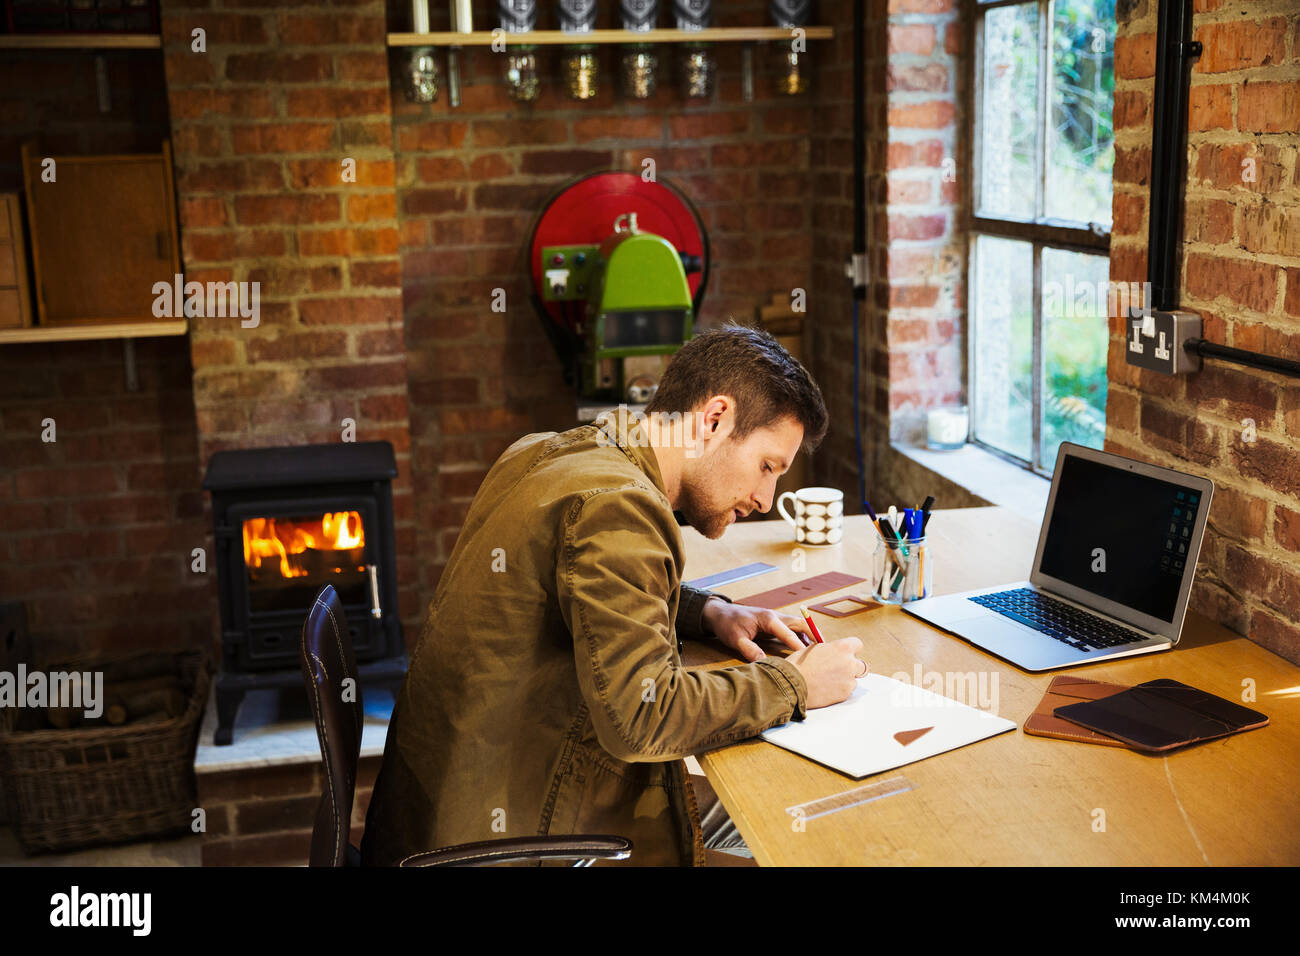 A designer seated in his leatherwork workshop, at a desk drawing on paper. A woodburning stove with a lit fire. Stock Photo